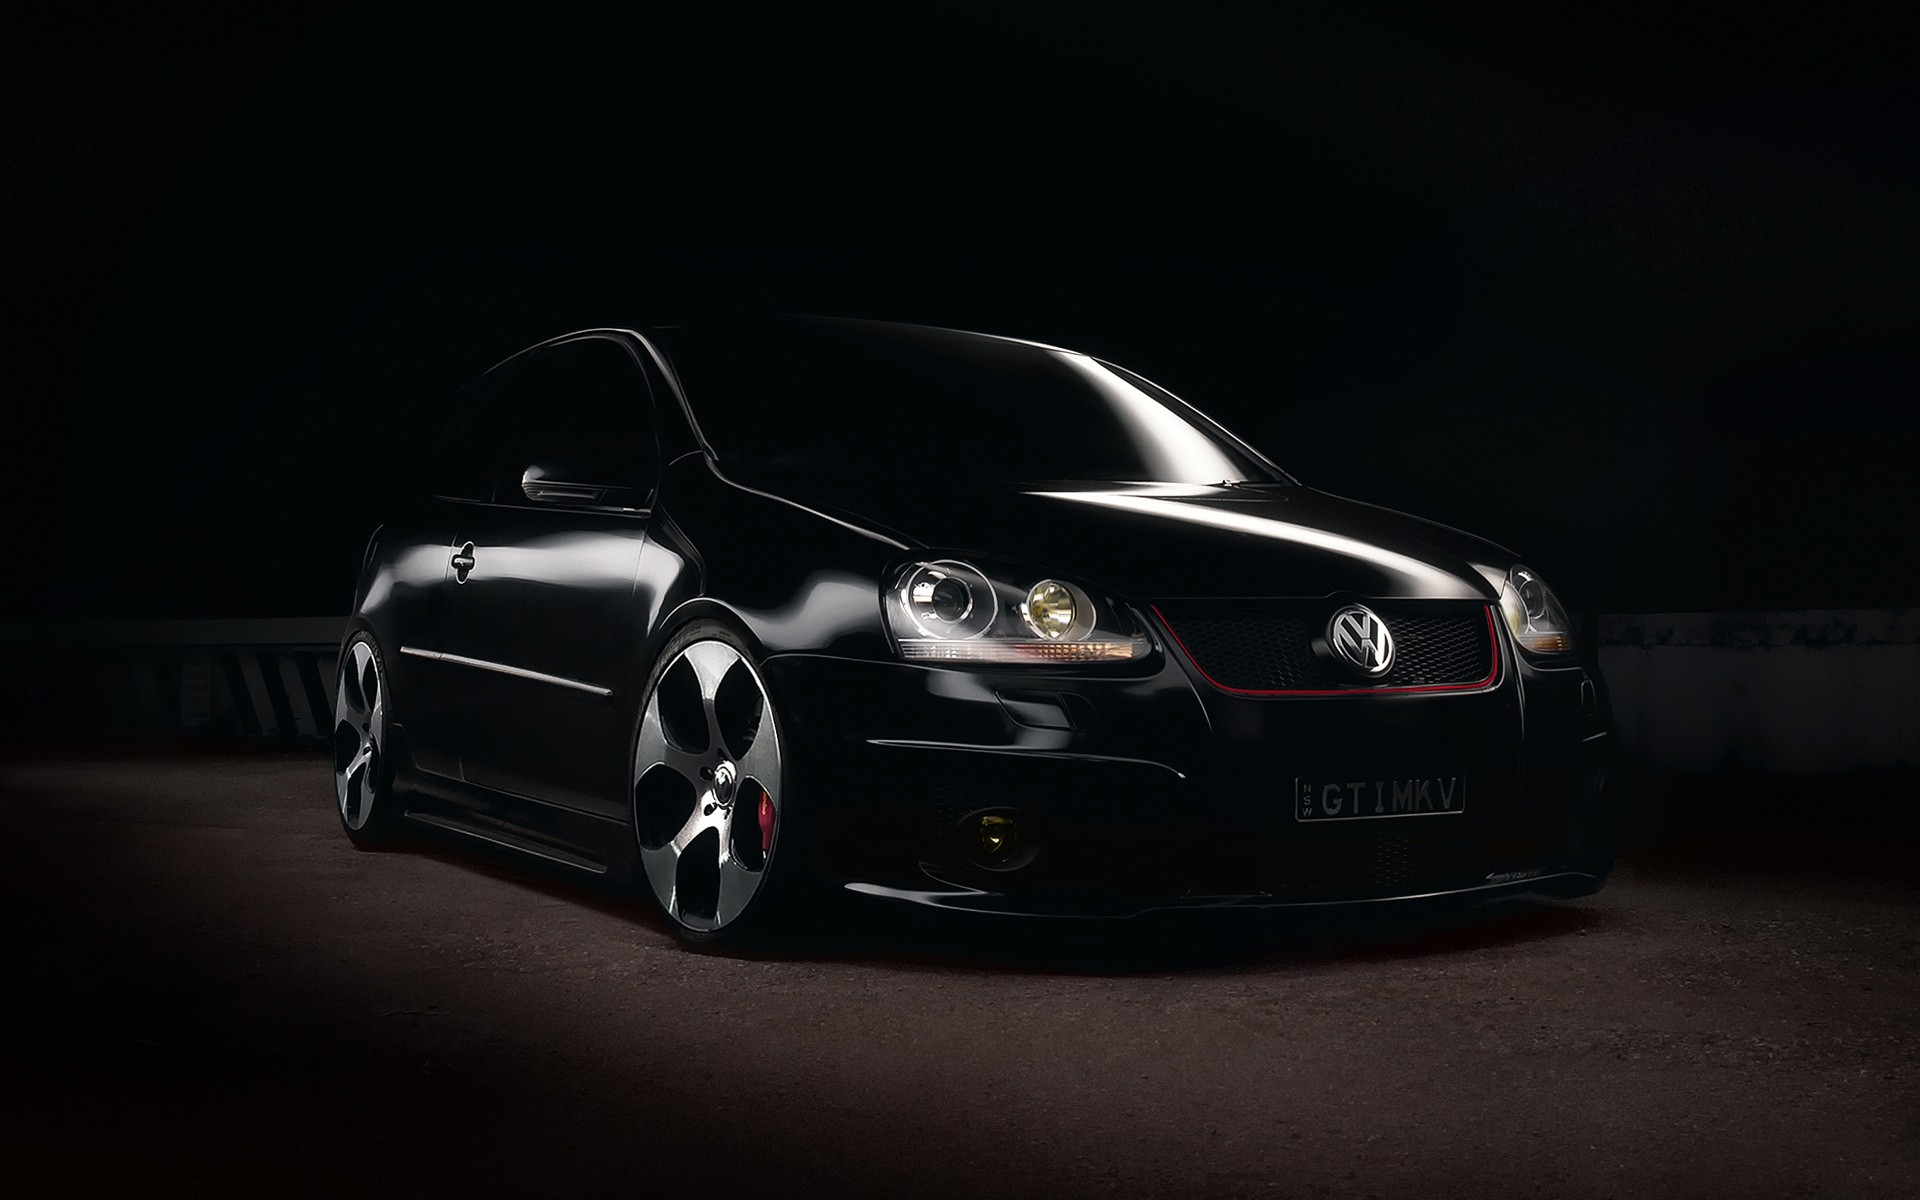 Black and white cars volkswagen gti black cars wallpaper background